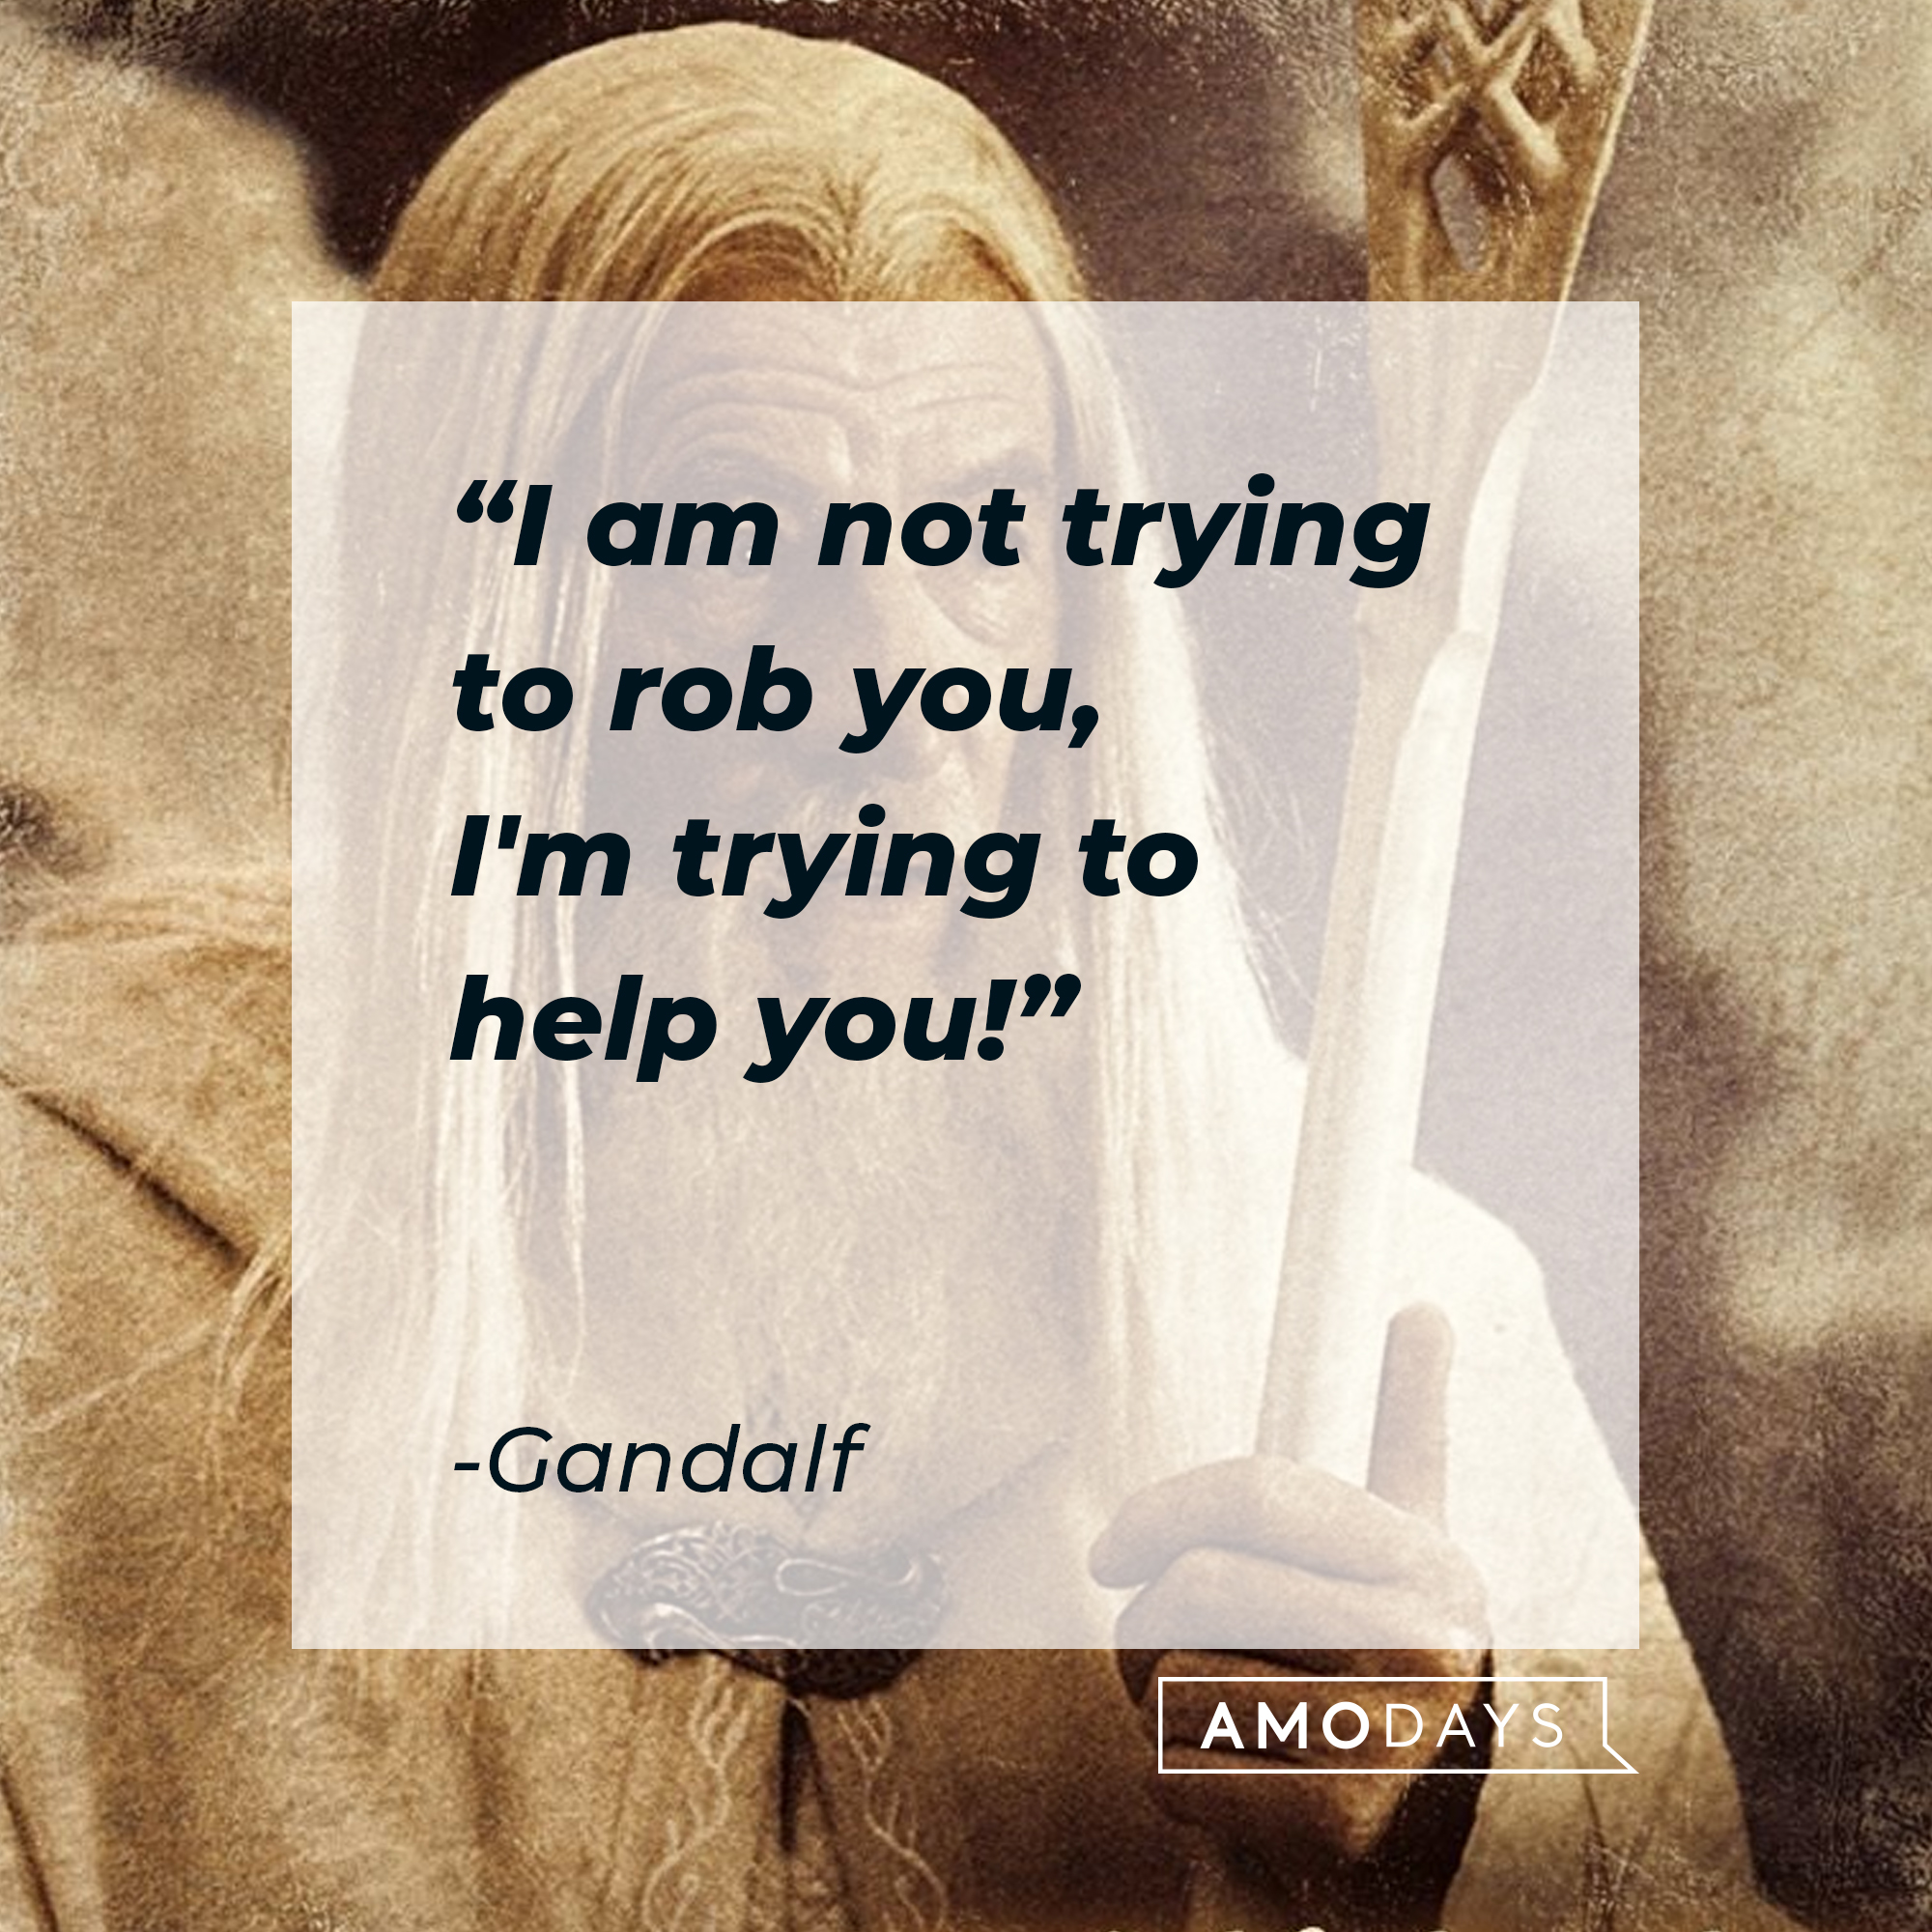 Gandalf with his quote from "The Lord of the Rings:" "I am not trying to rob you, I'm trying to help you!" | Source: Facebook/lordoftheringstrilogy